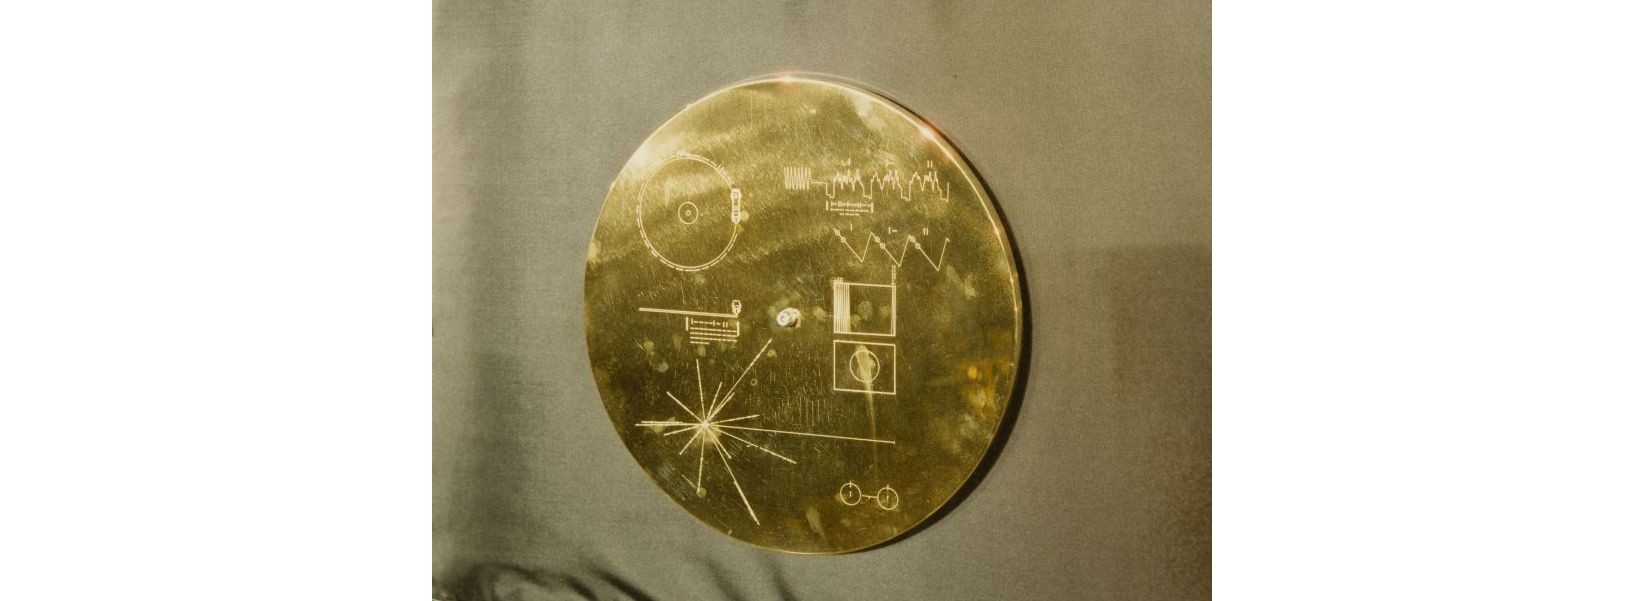 Photo from 1977 of NASA's Golden Record. A gold vinyl record hangs on a wall with geometric symbols etched on its surface.